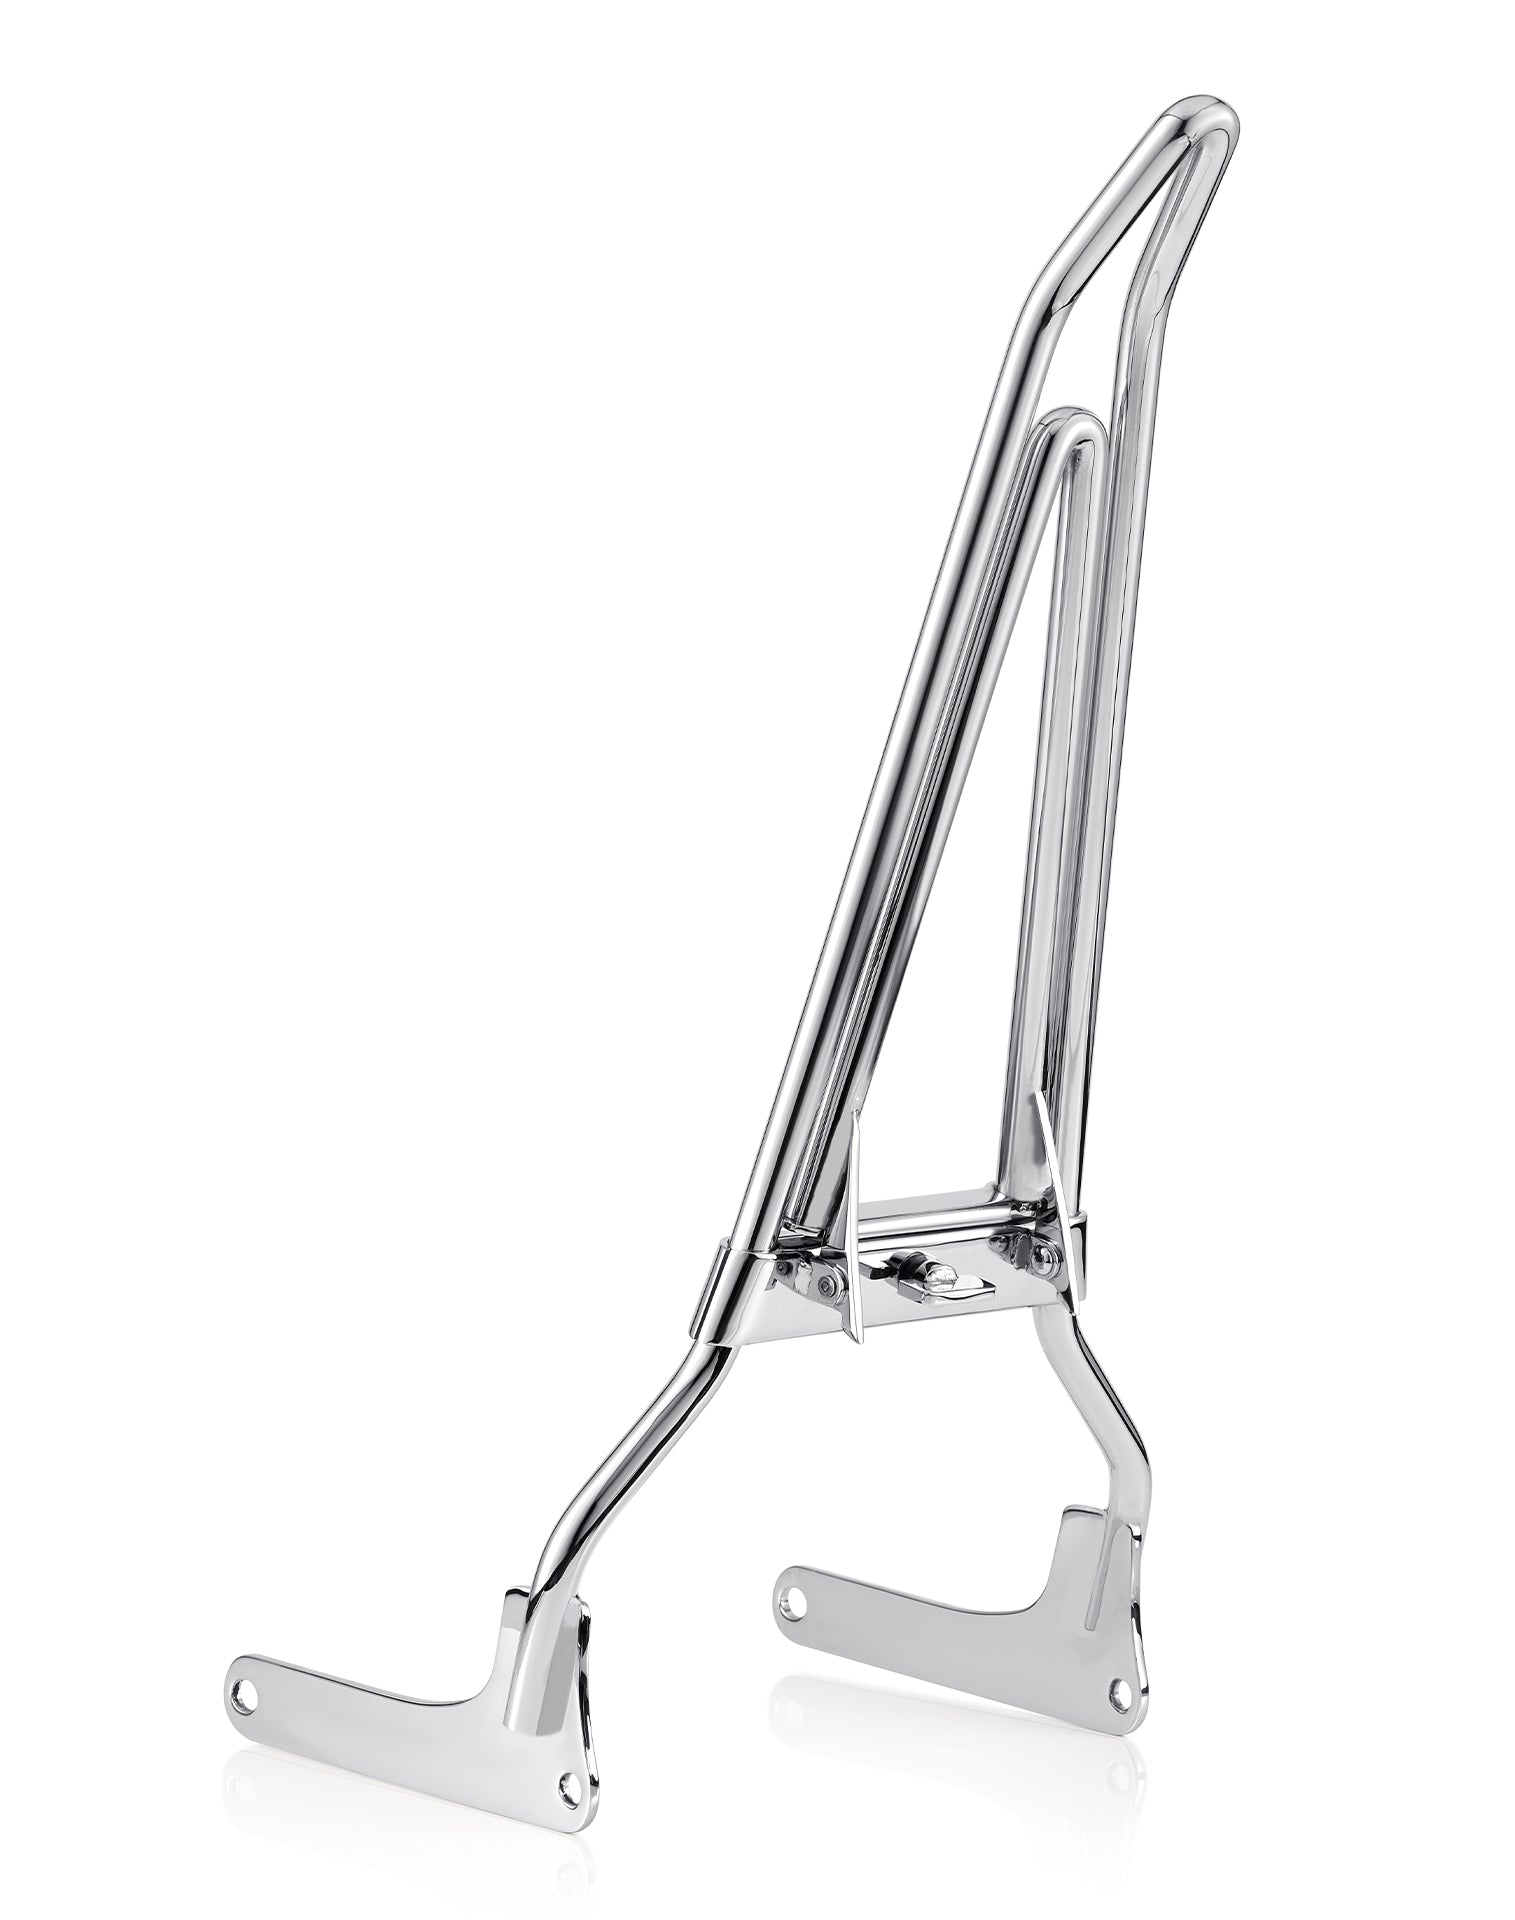 Iron Born Blade 25" Sissy Bar w/ Foldable Luggage Rack for Harley Softail Deluxe FLDE Chrome